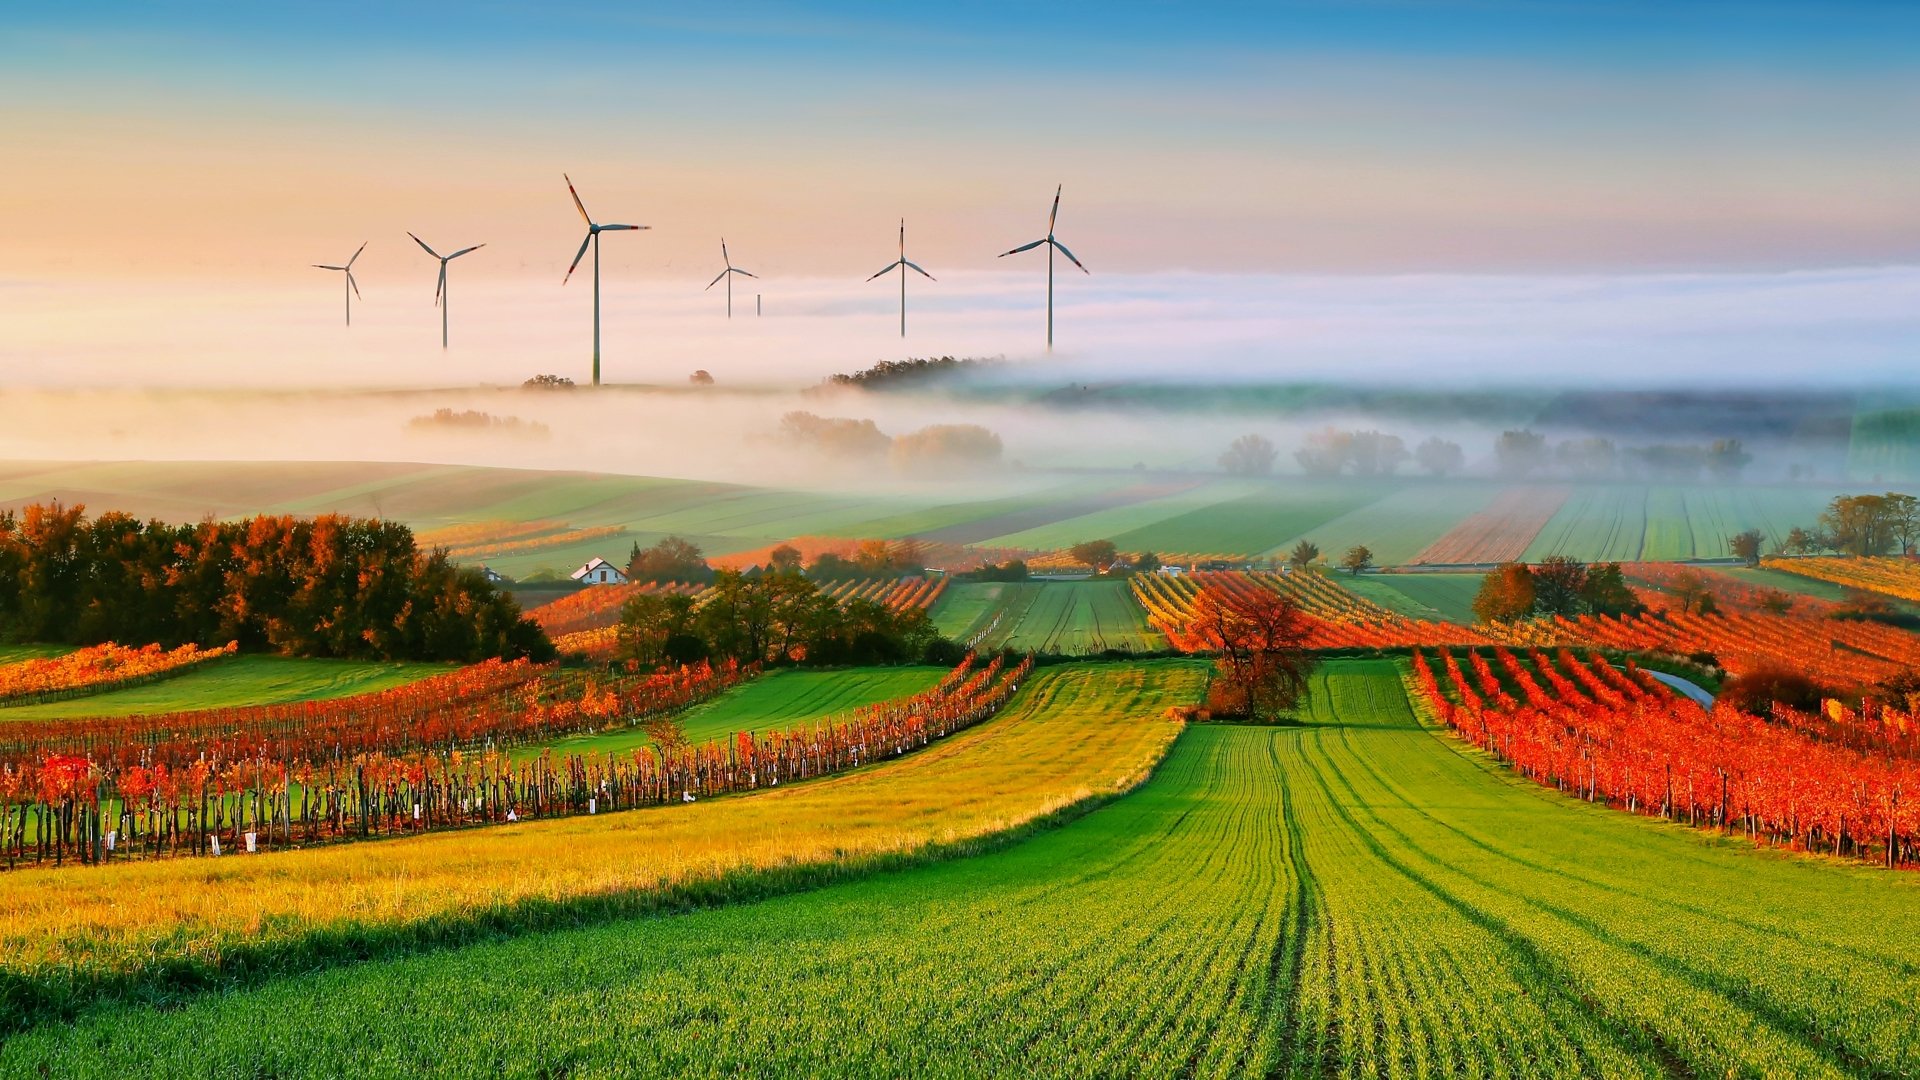 Wind Turbine Photos Download The BEST Free Wind Turbine Stock Photos  HD  Images